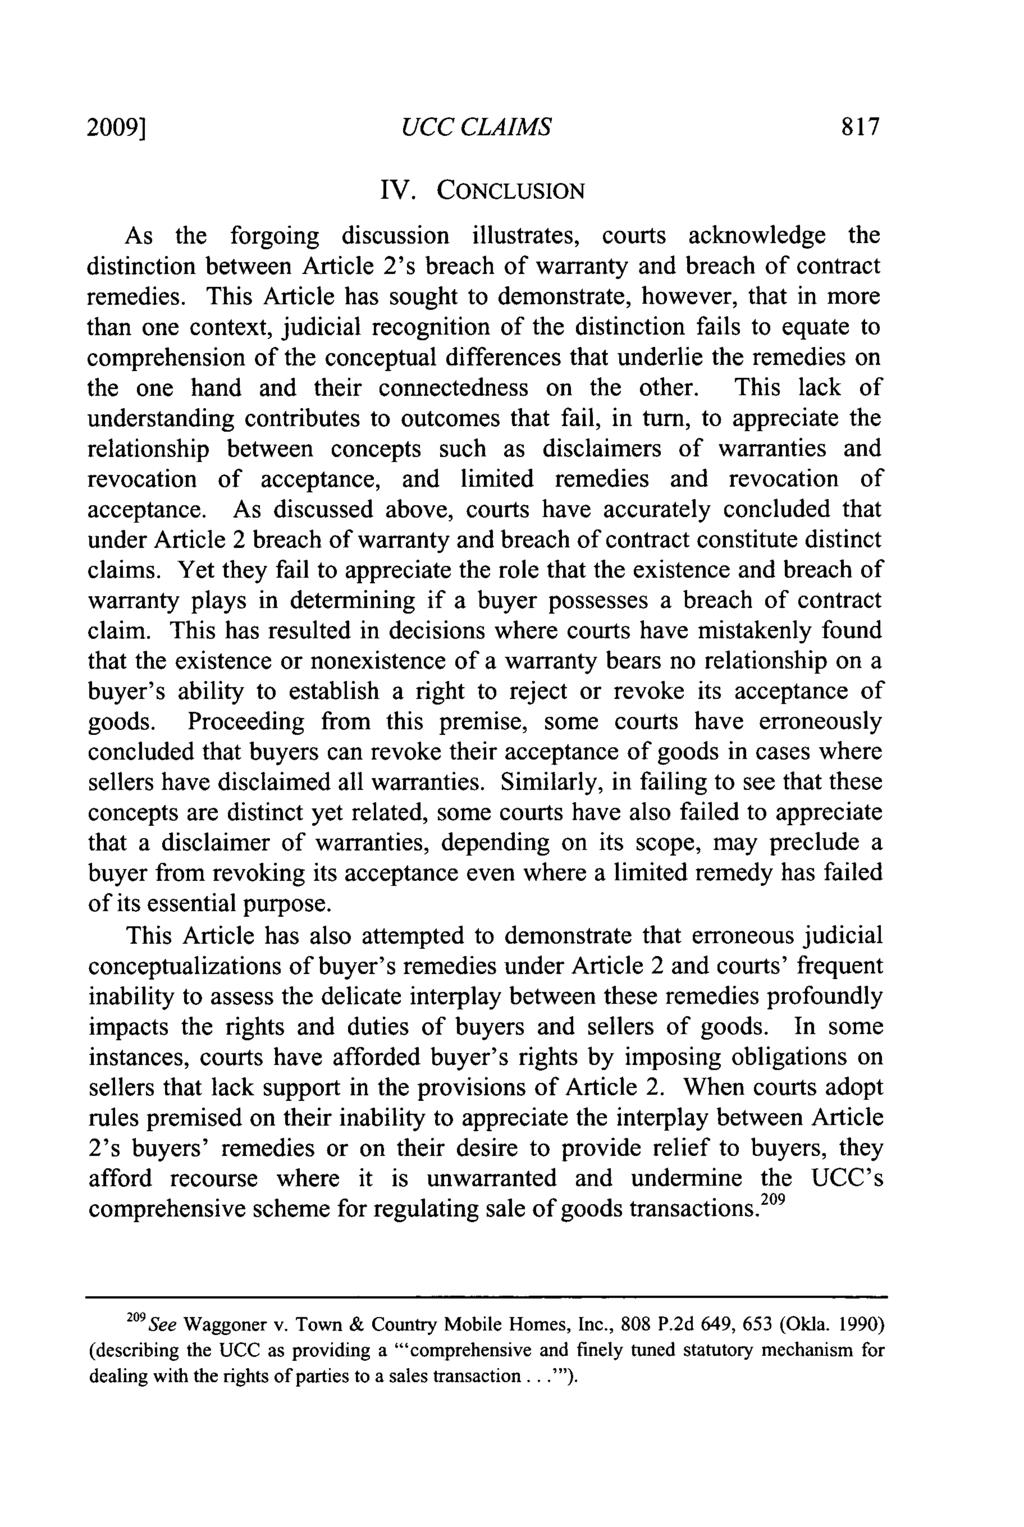 2009] UCC CLAIMS IV. CONCLUSION As the forgoing discussion illustrates, courts acknowledge the distinction between Article 2's breach of warranty and breach of contract remedies.